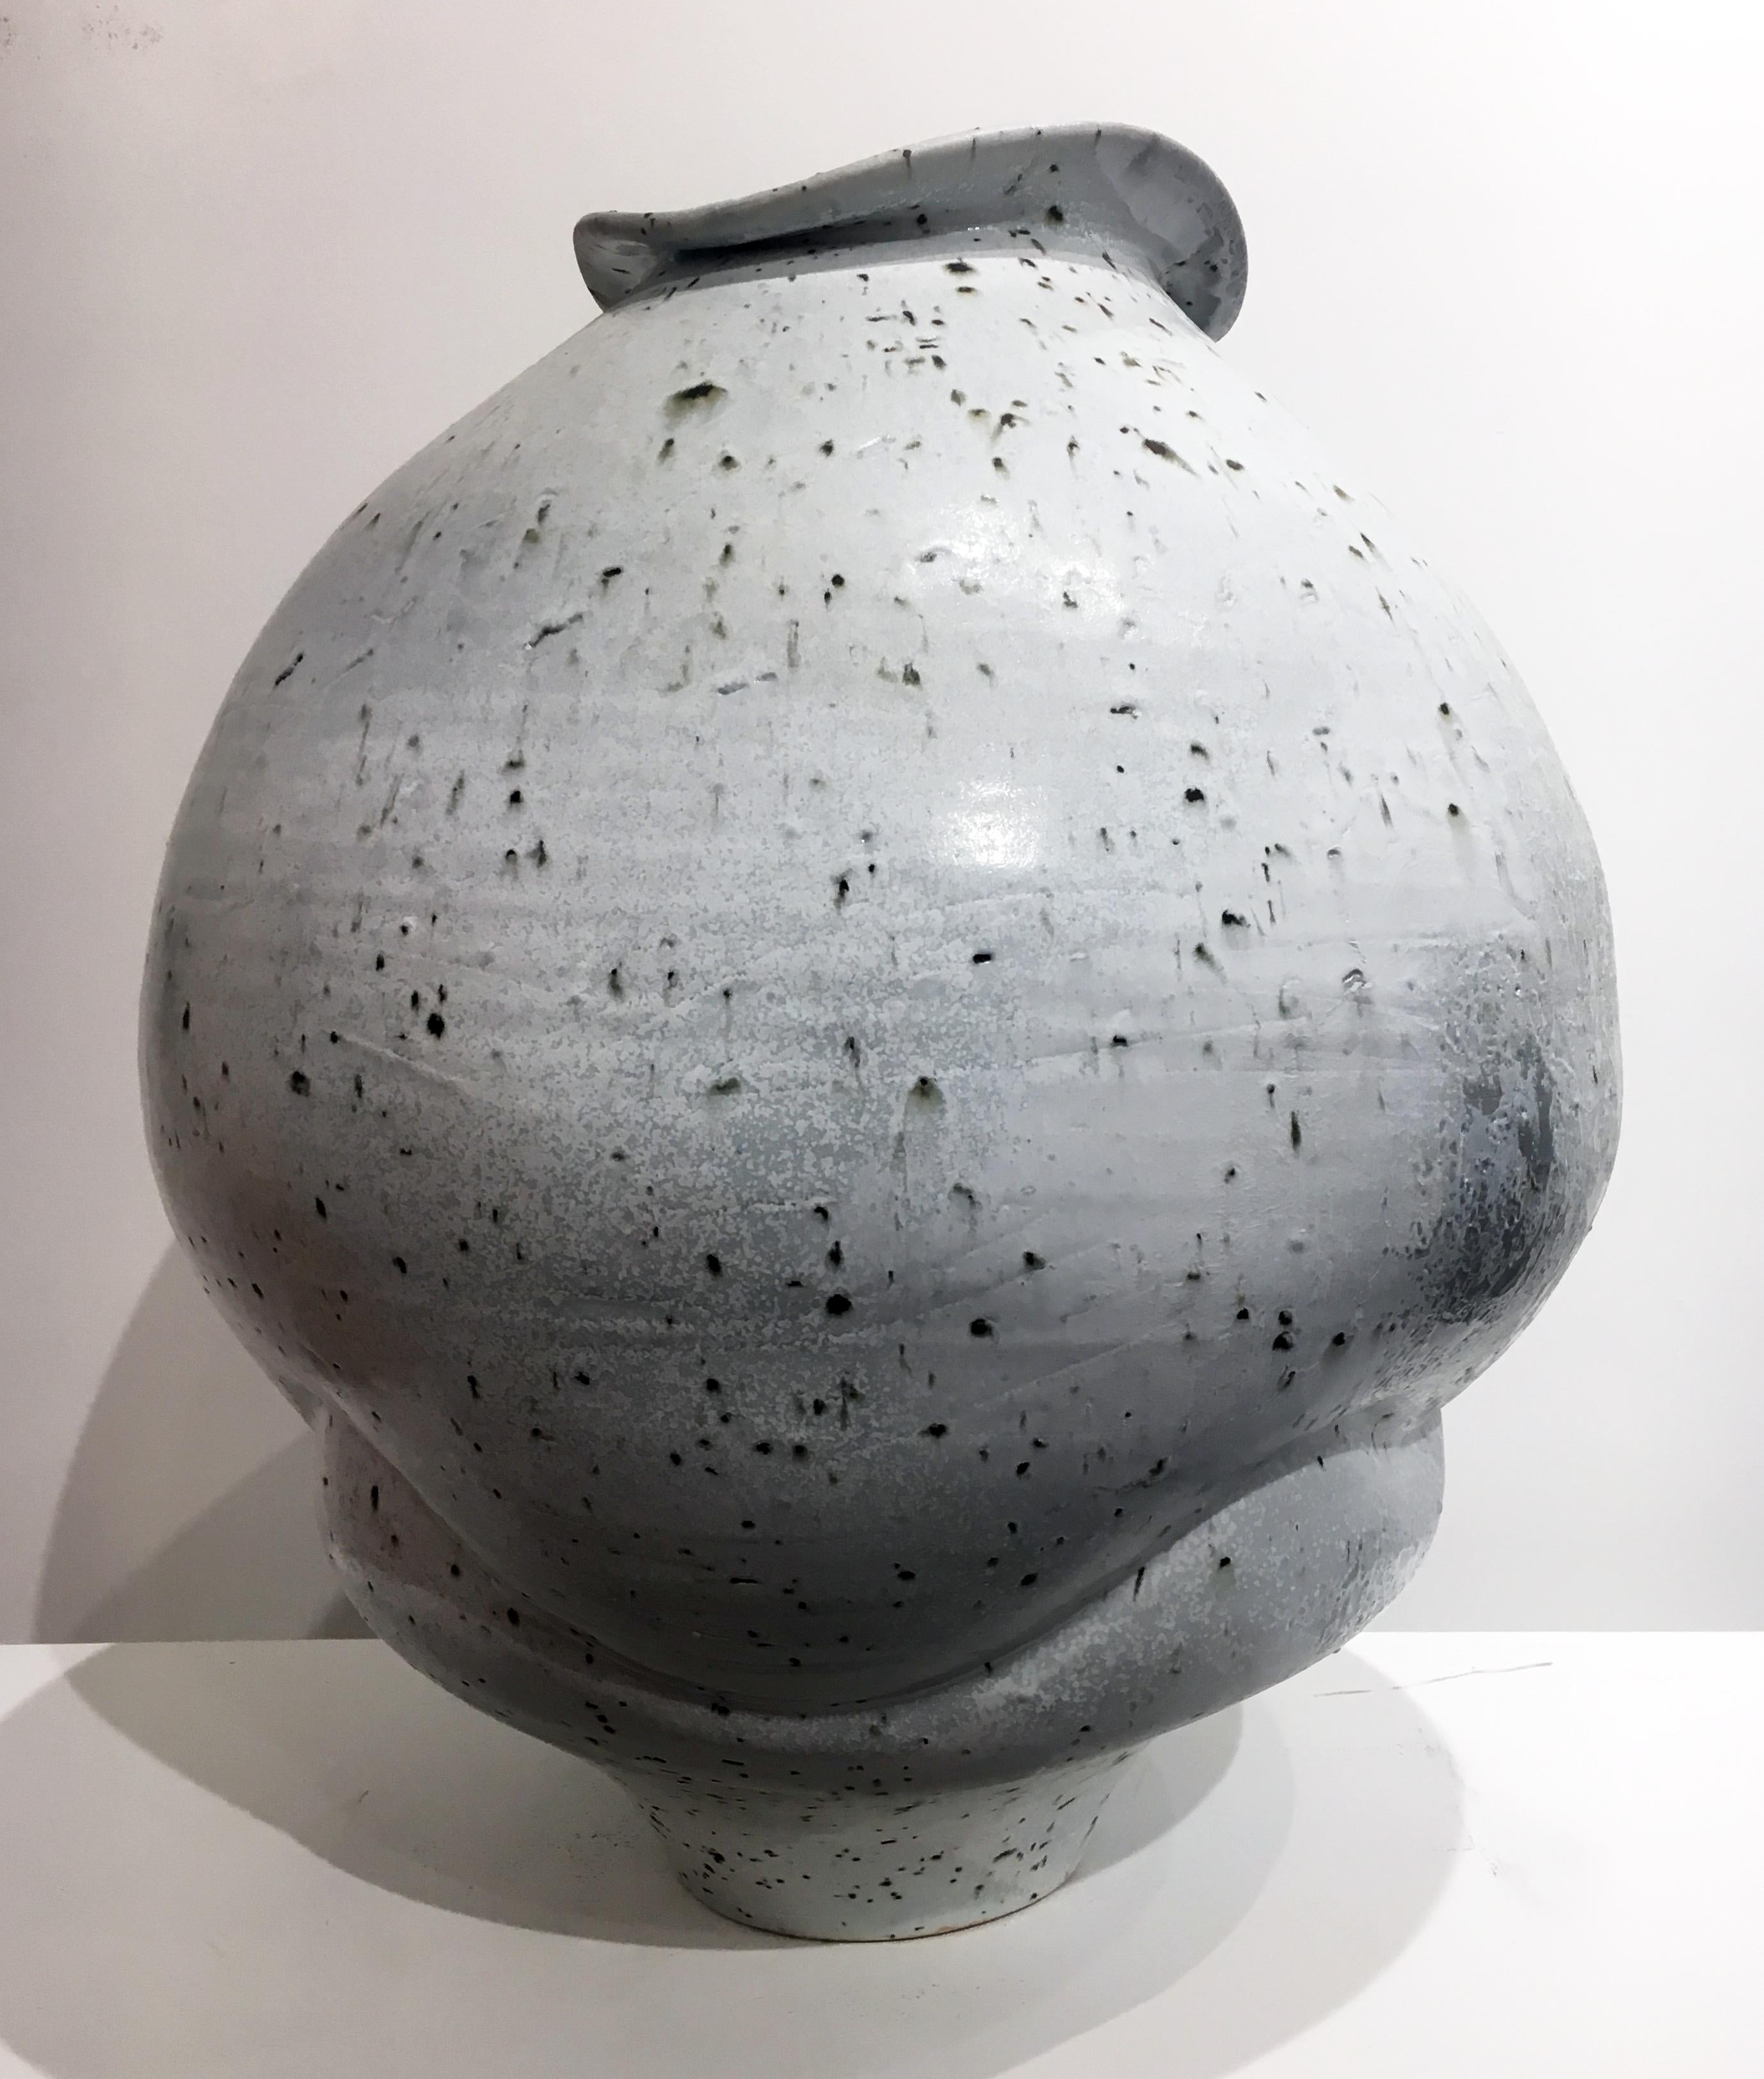 Perry Haas Abstract Sculpture - Contemporary Design, Ceramic Sculpture, Porcelain, Iron Particles, Glaze, Clay